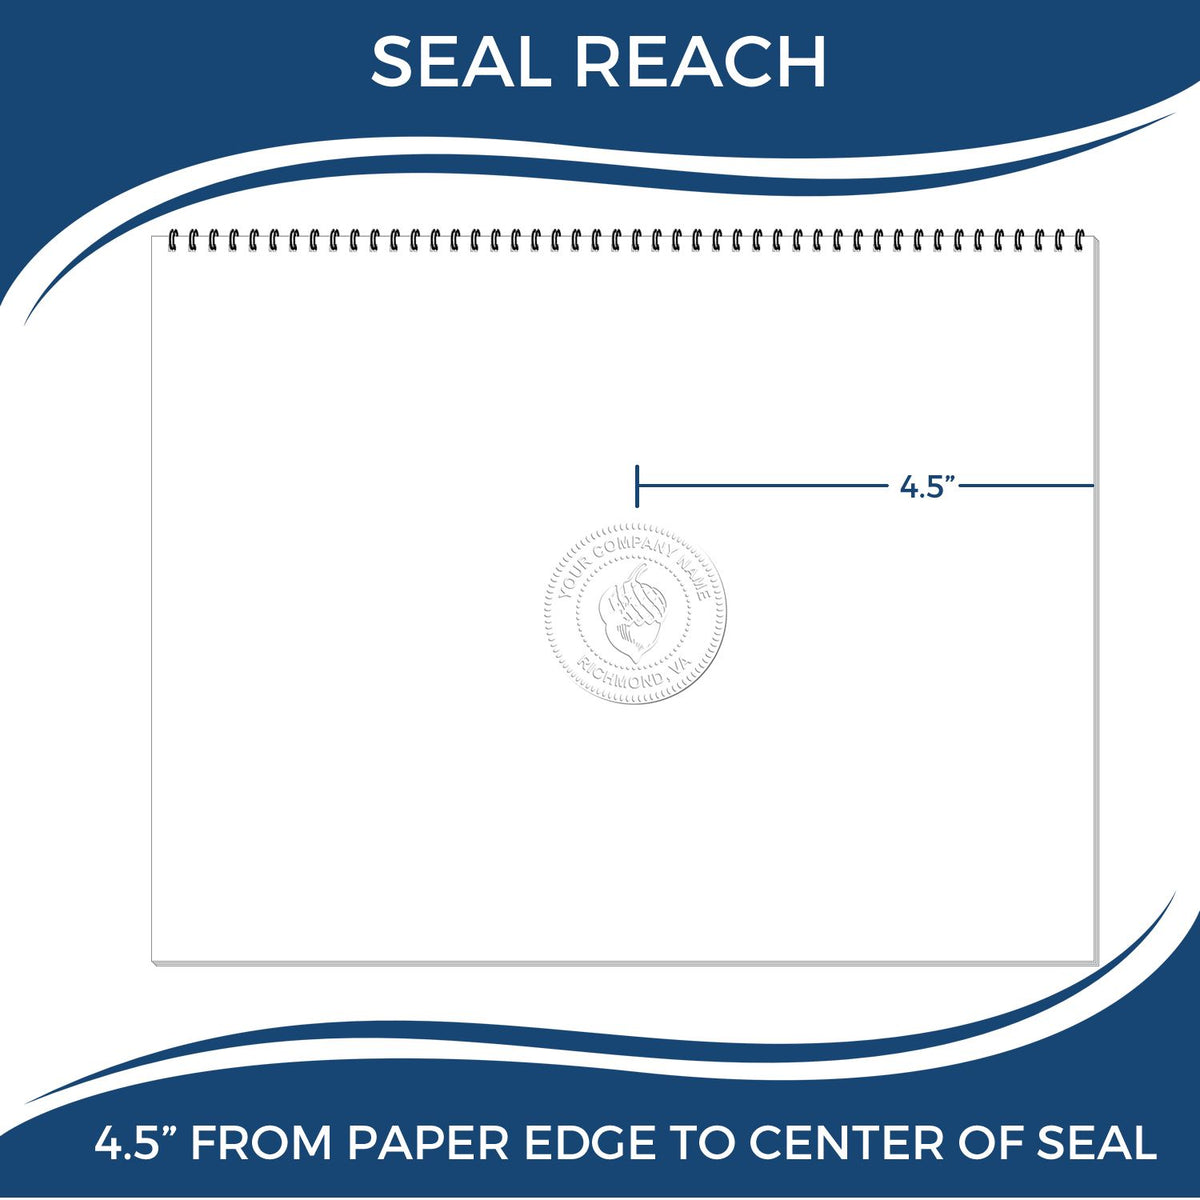 An infographic showing the seal reach which is represented by a ruler and a miniature seal image of the State of Michigan Extended Long Reach Engineer Seal